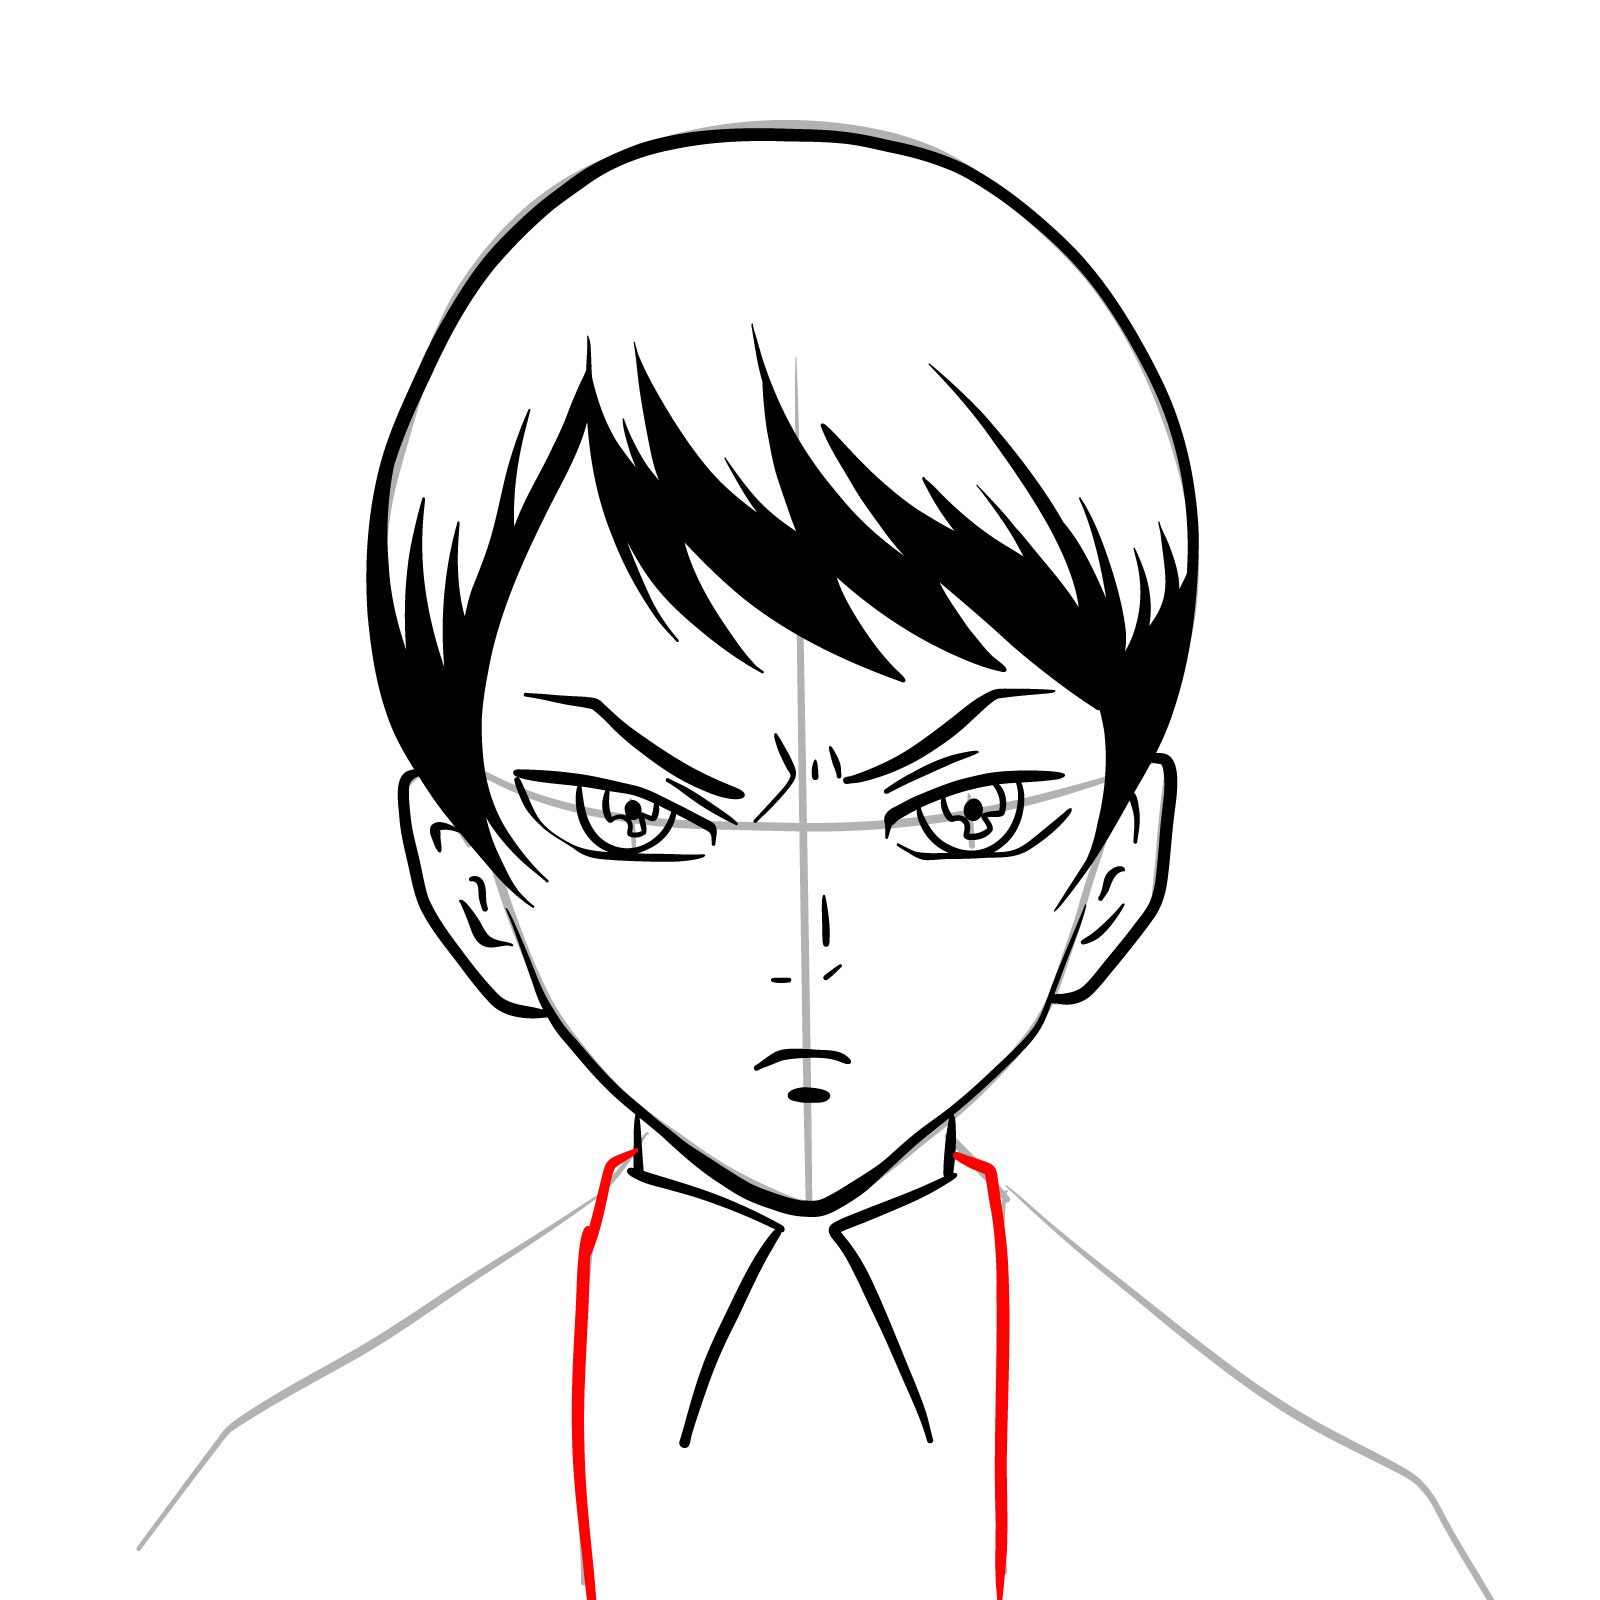 How to draw Yushiro's face from Demon Slayer - step 15